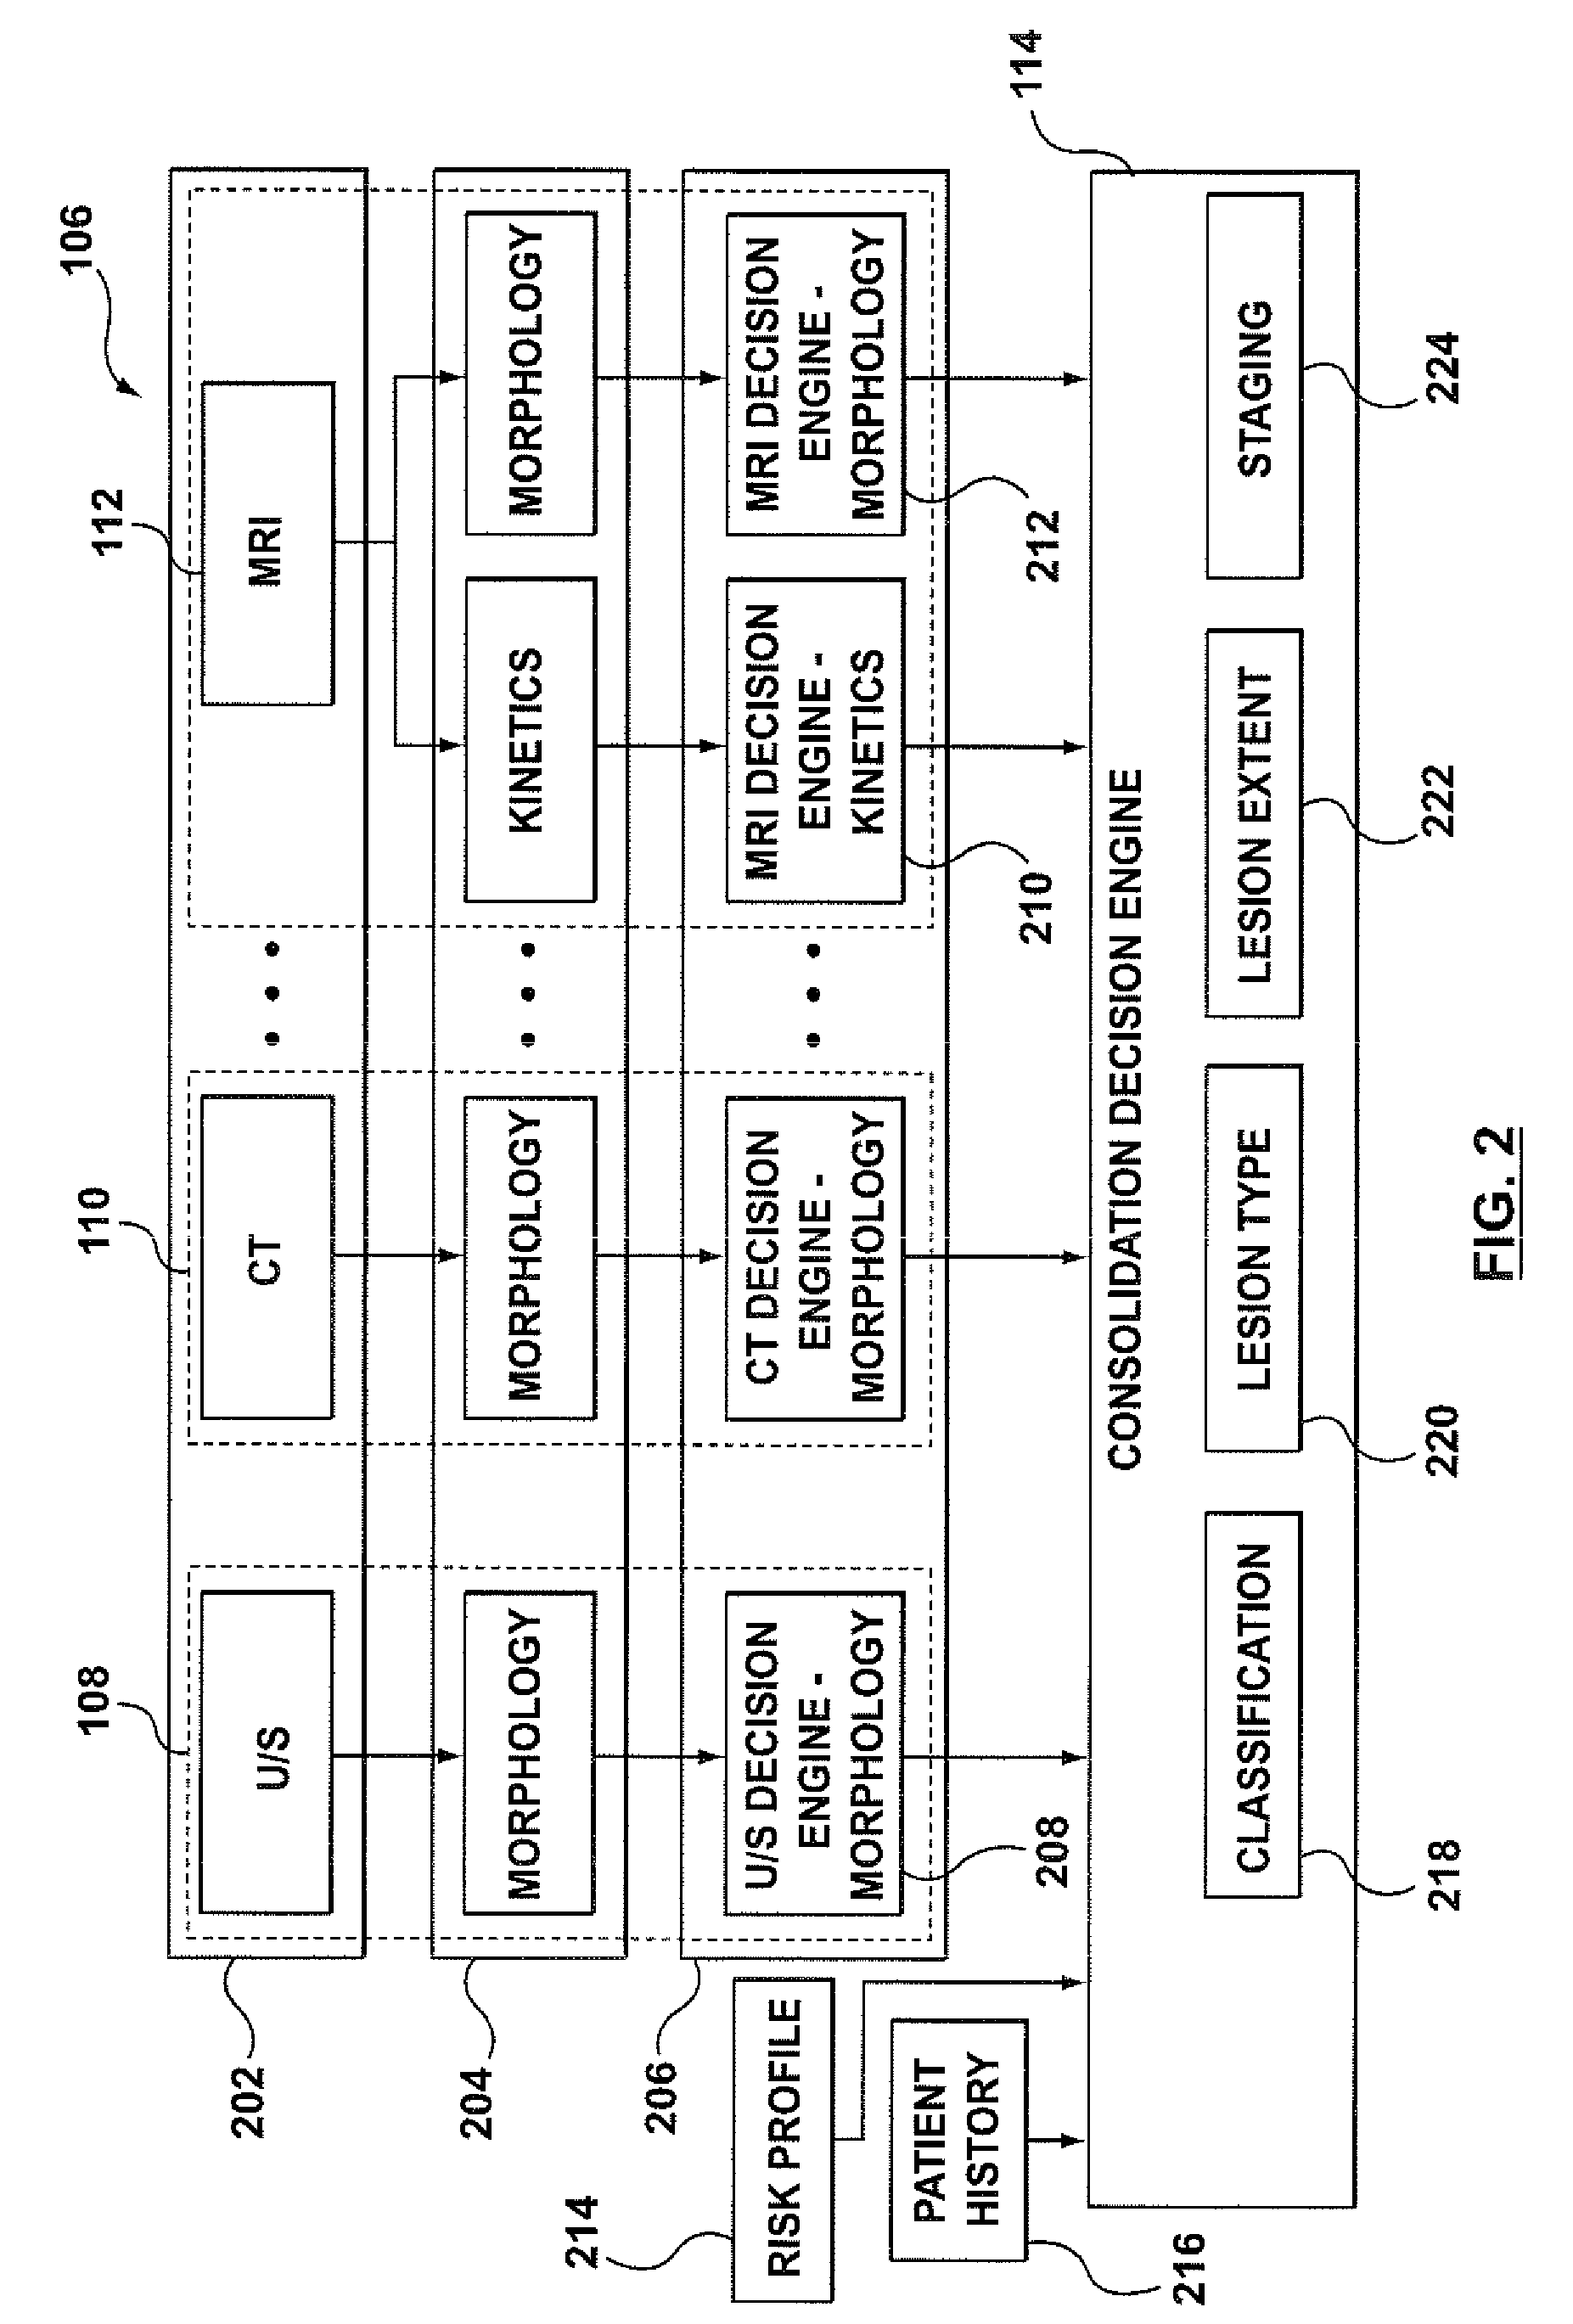 Method and system of computer-aided quantitative and qualitative analysis of medical images